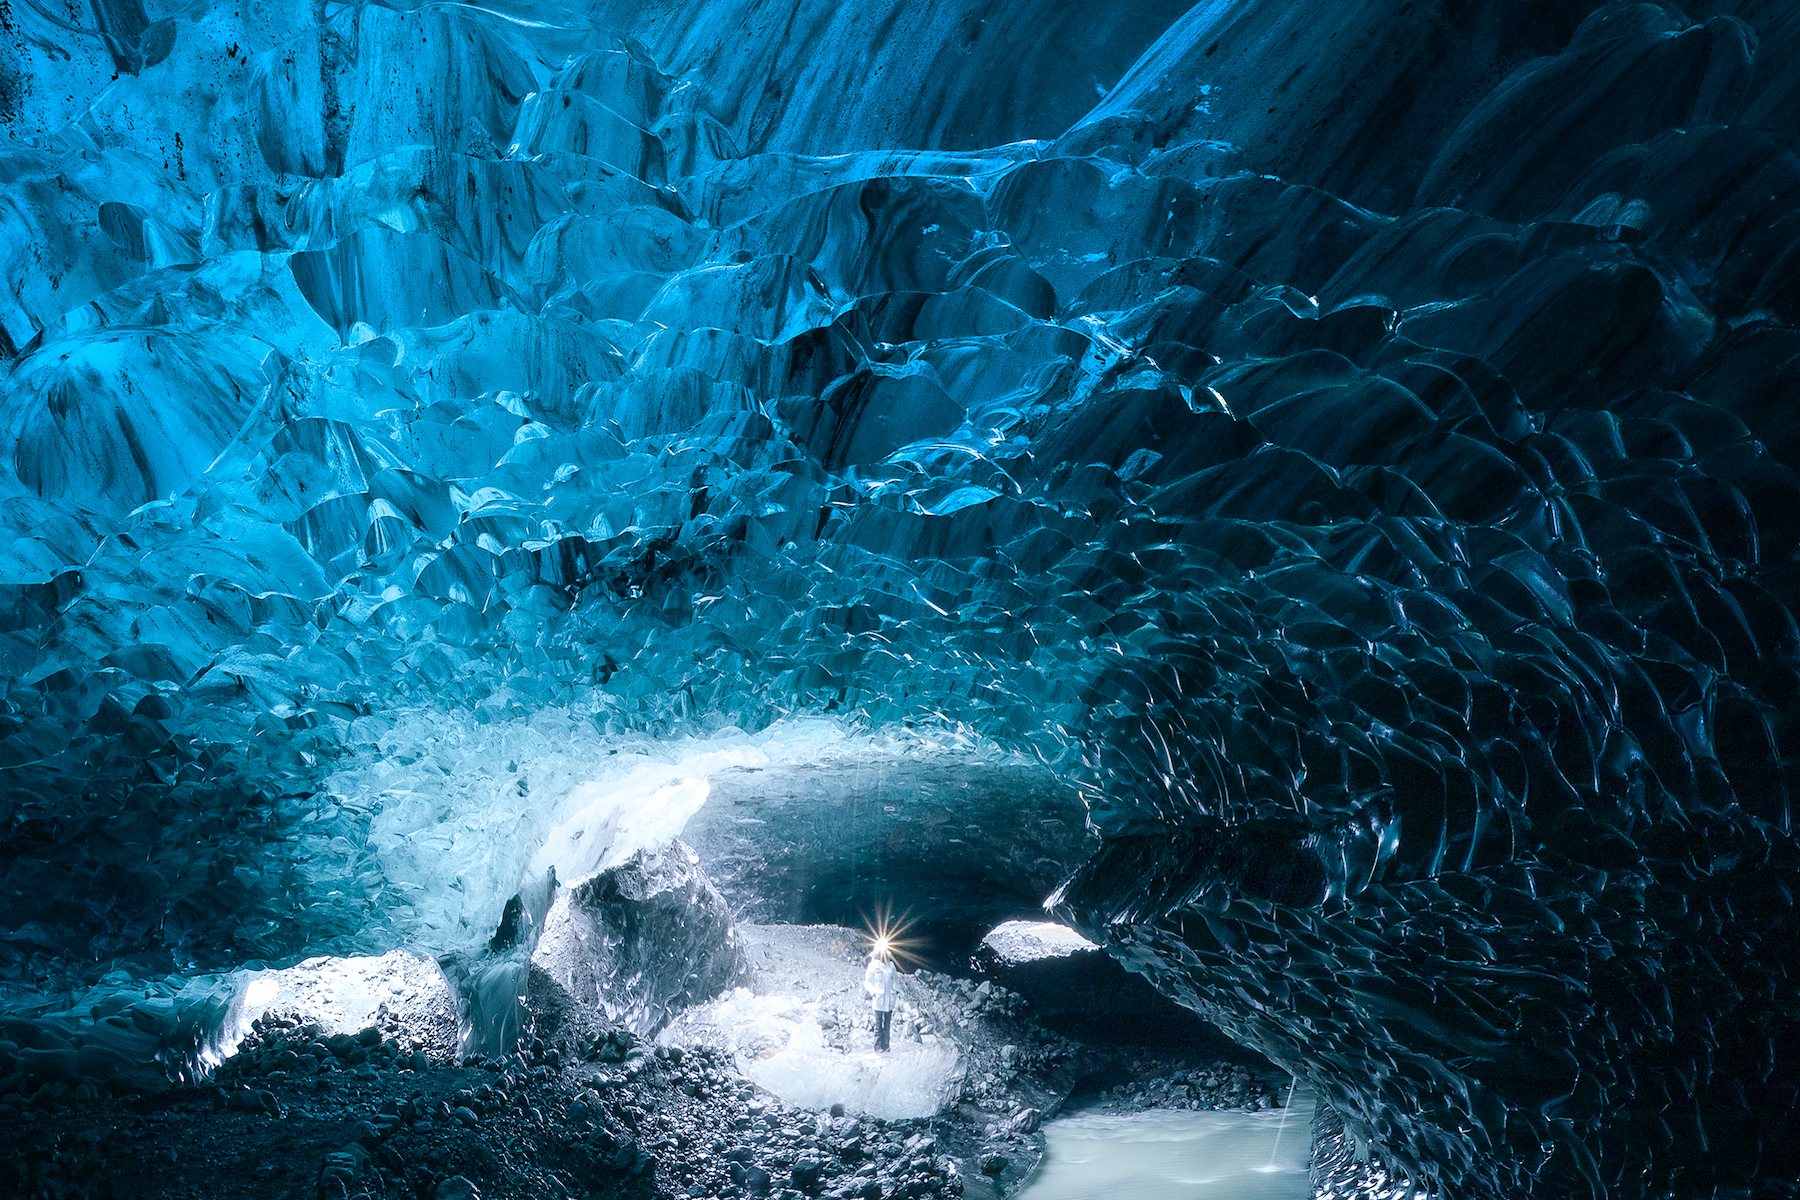 The ice cave in 2021/2022 winter is of great size and condition.